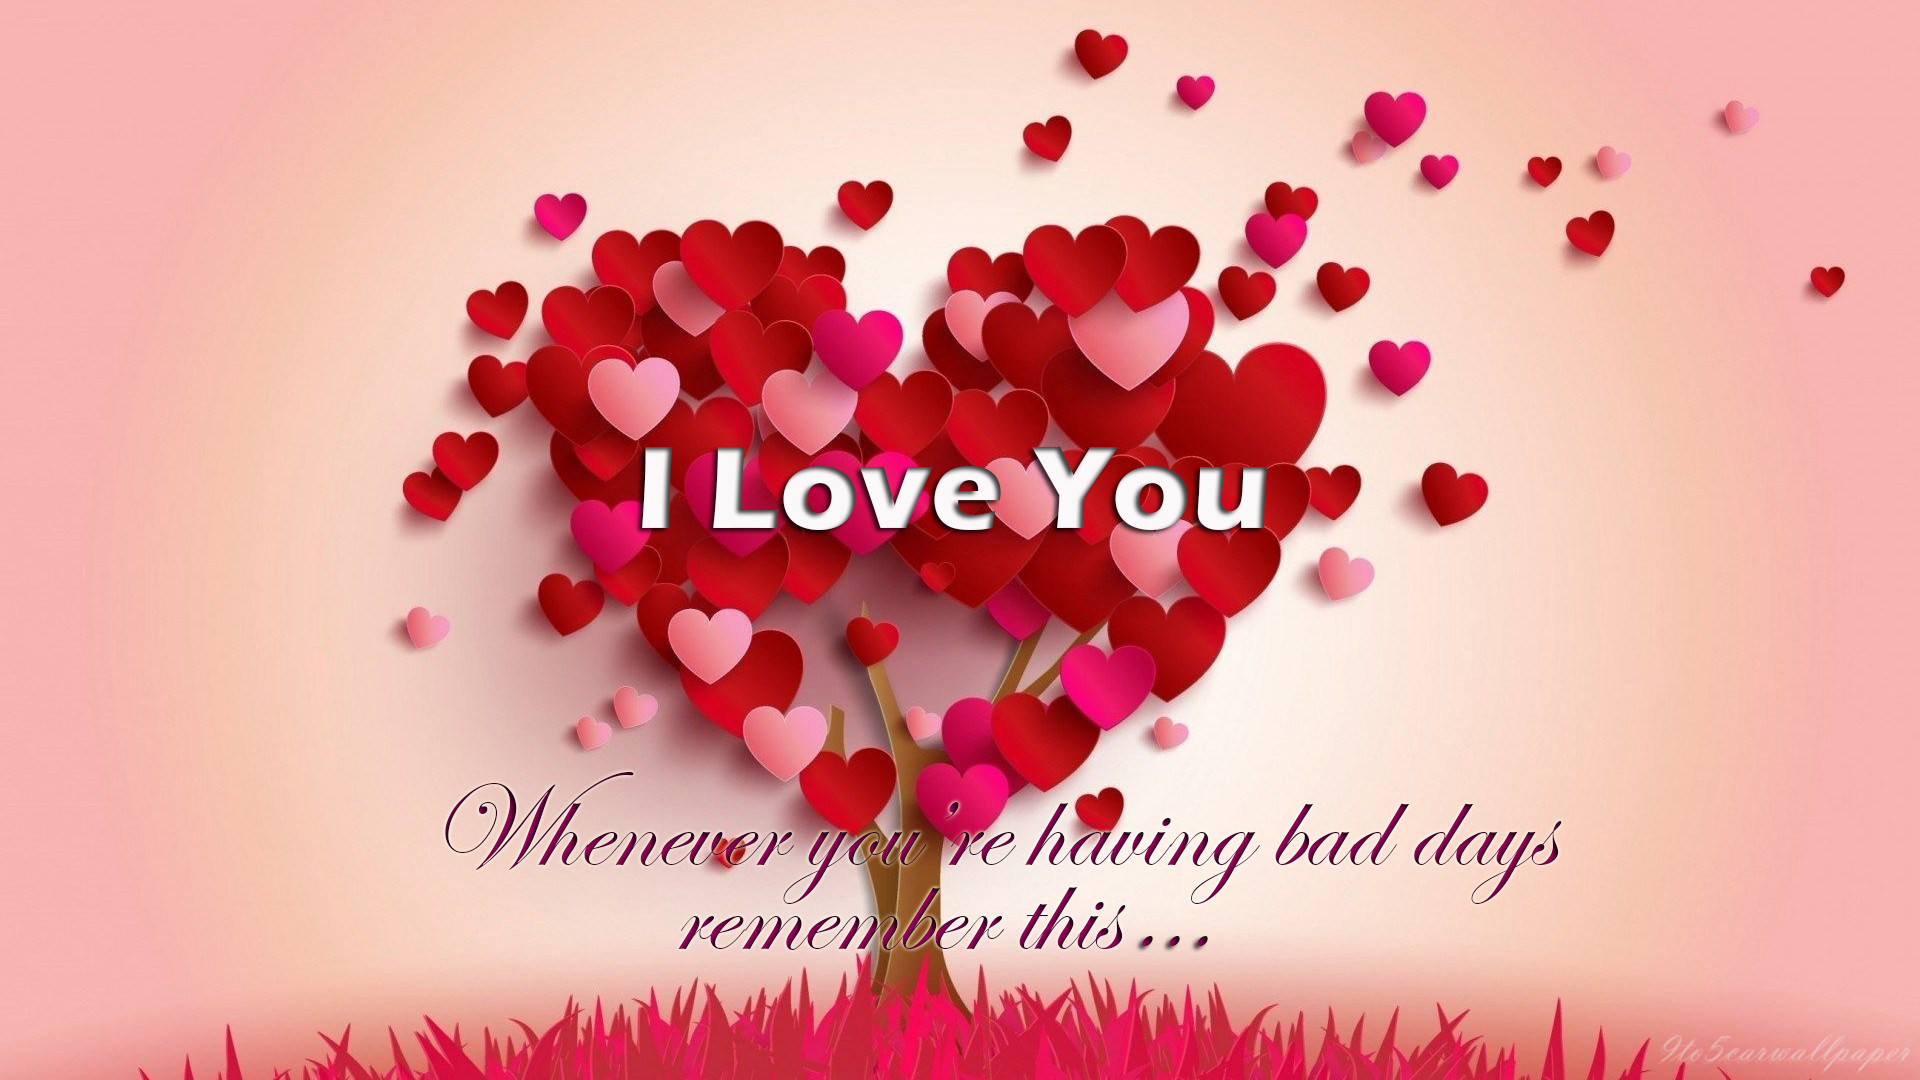 I Love You Hd Wallpapers Wishes Quotes Images 1920x1080